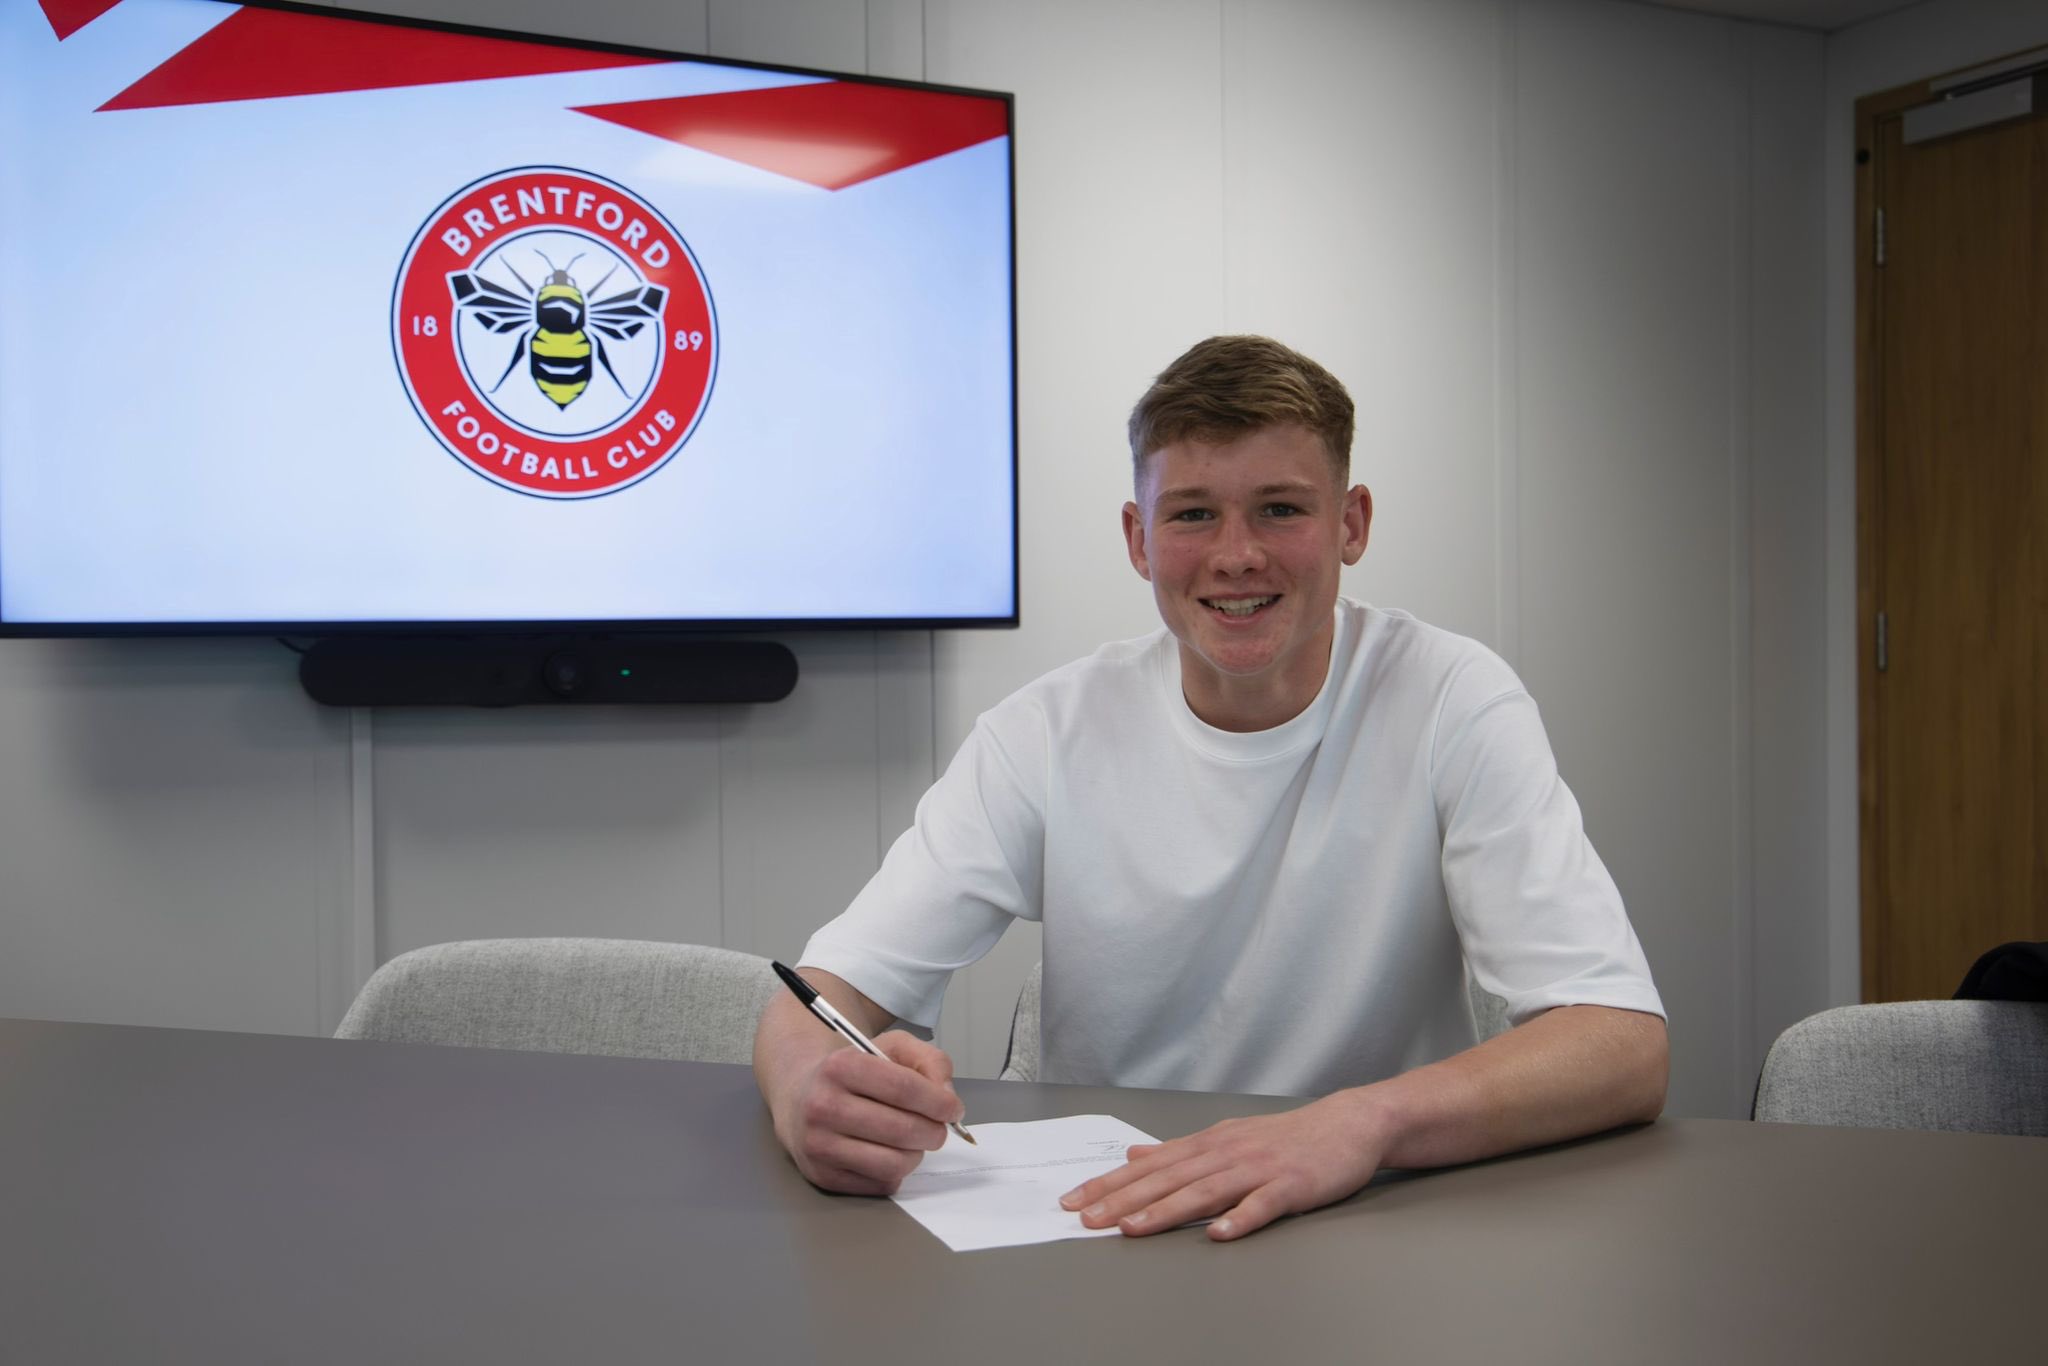 Kinetic graduate Reggie Rose signs new contract with Brentford FC